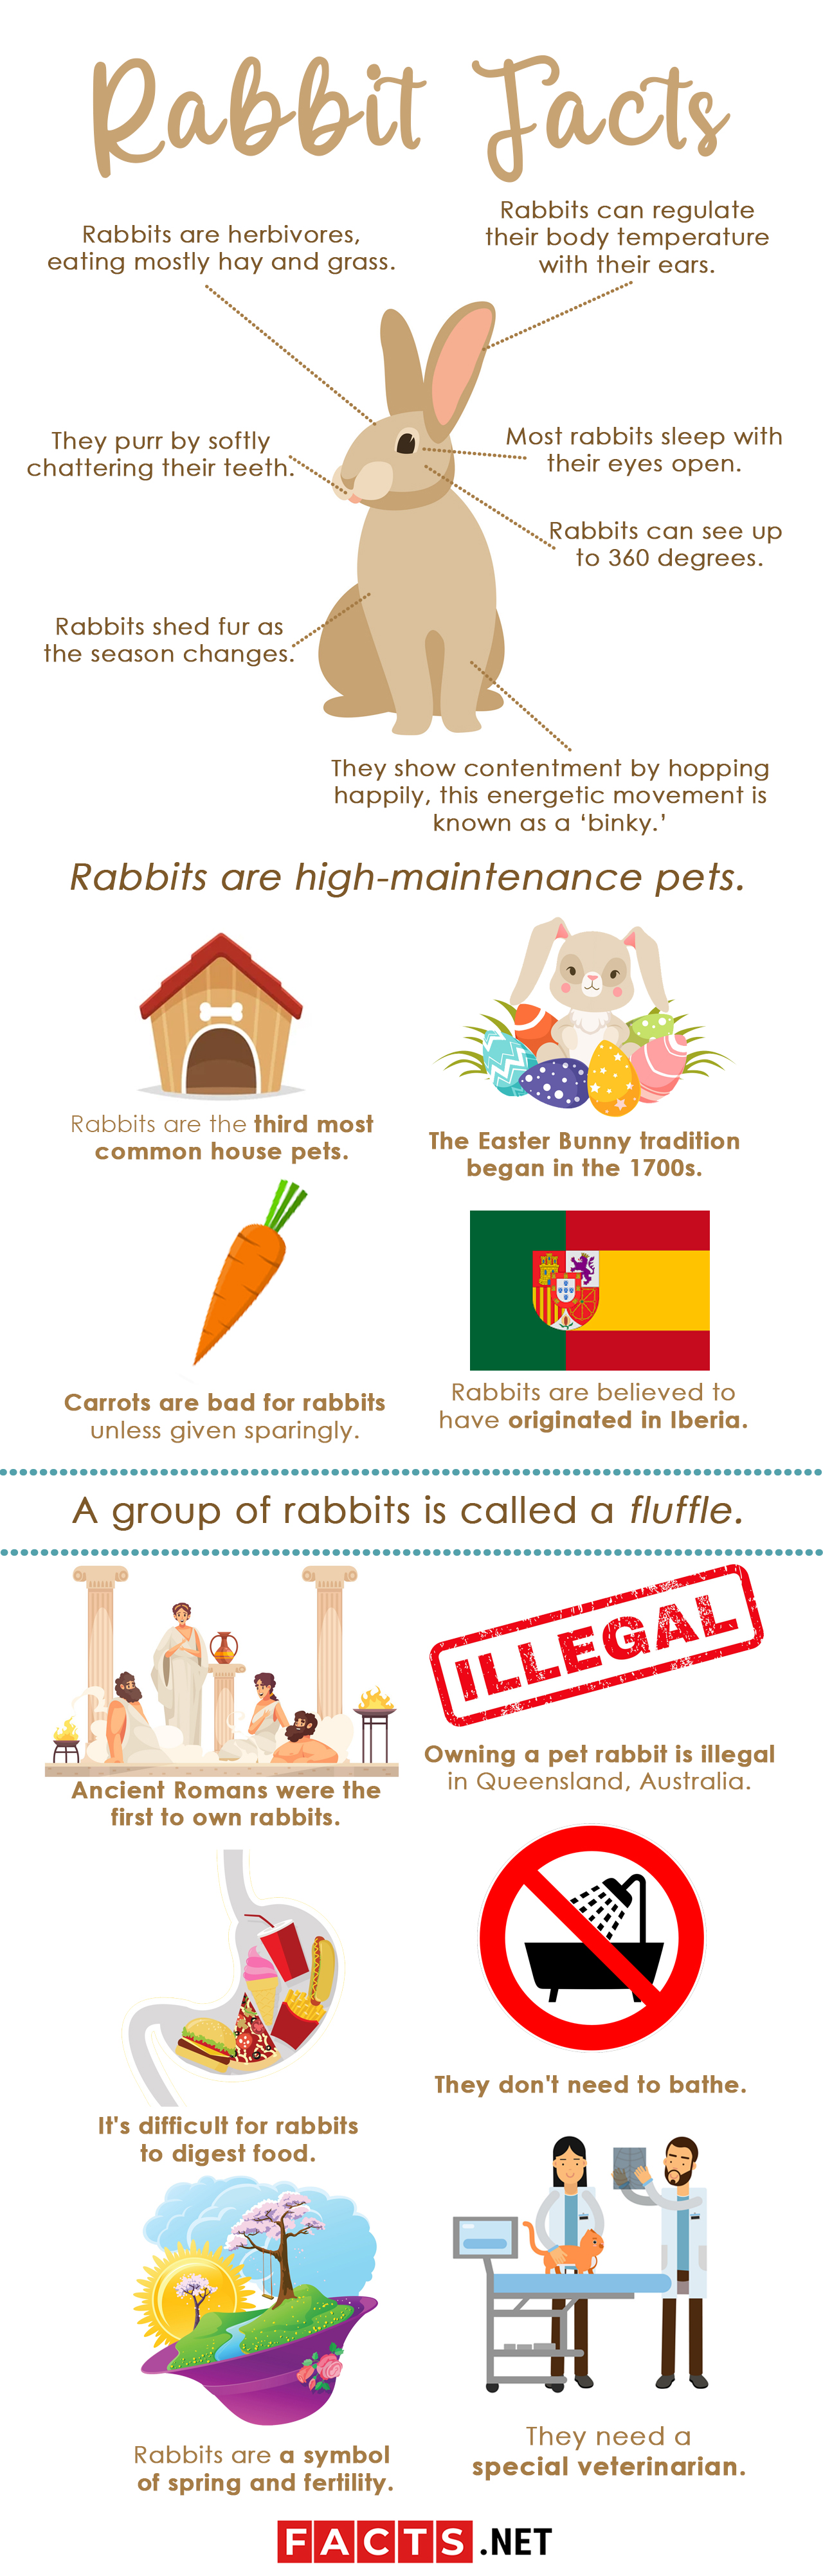 What Are Rabbits?